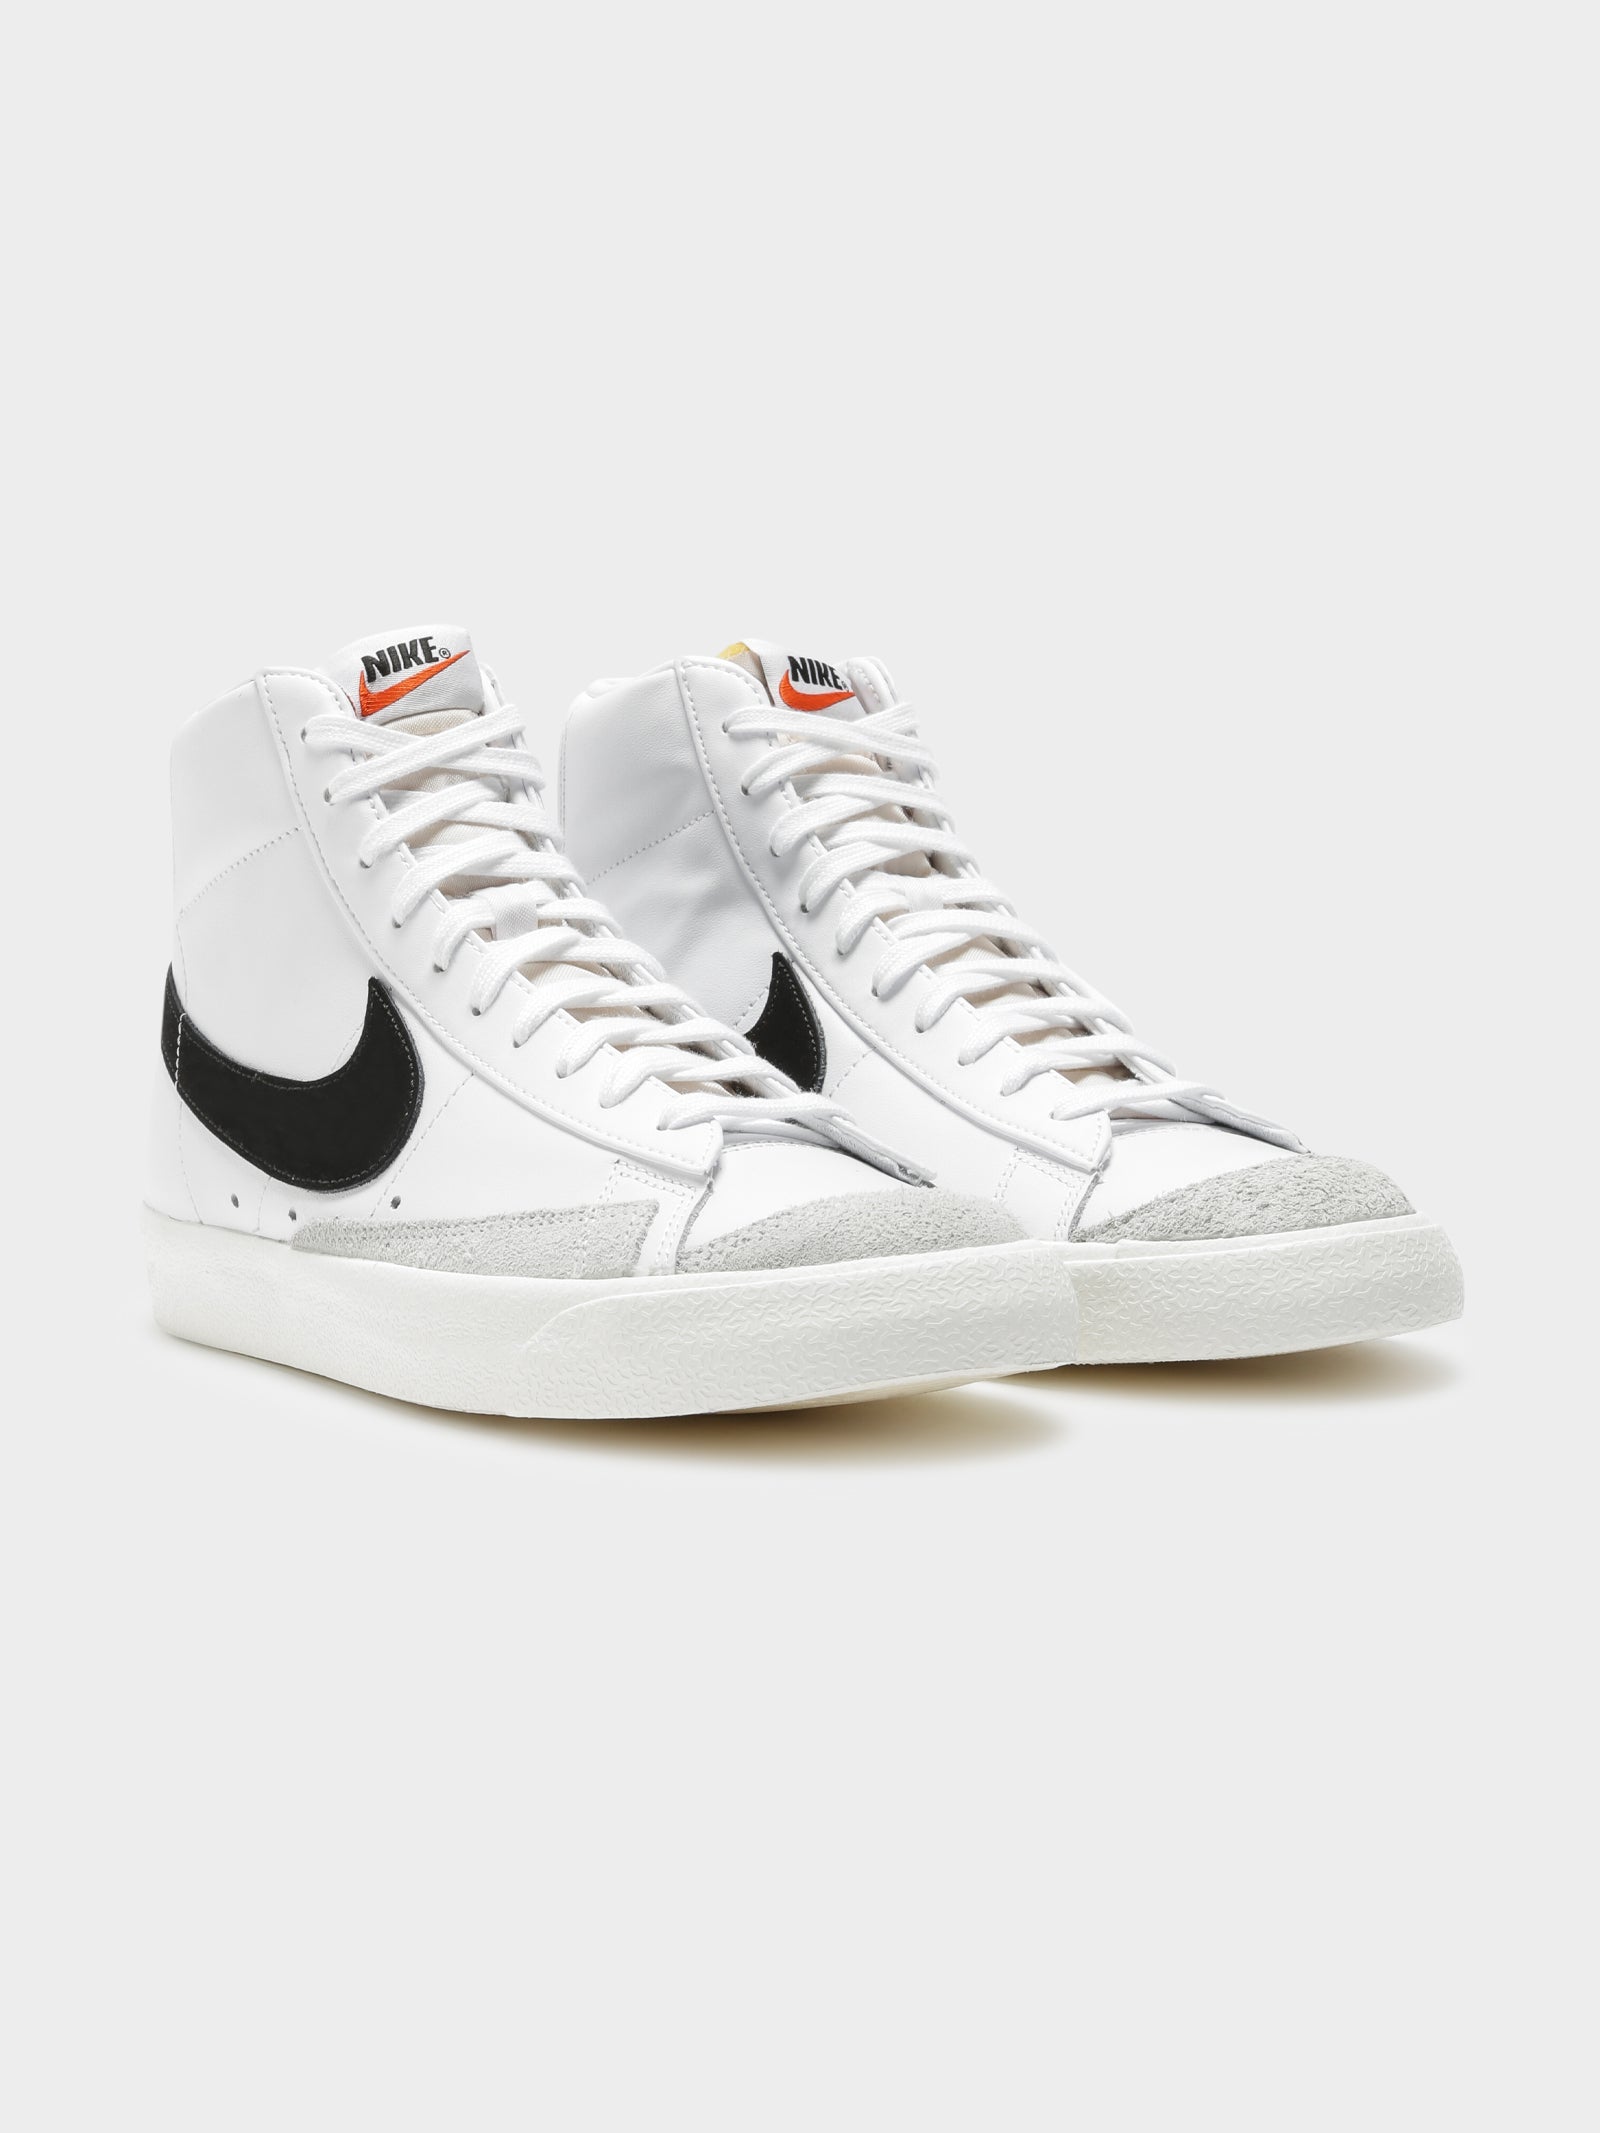 Womens Blazer Mid 77 High Top Sneakers in Black & White